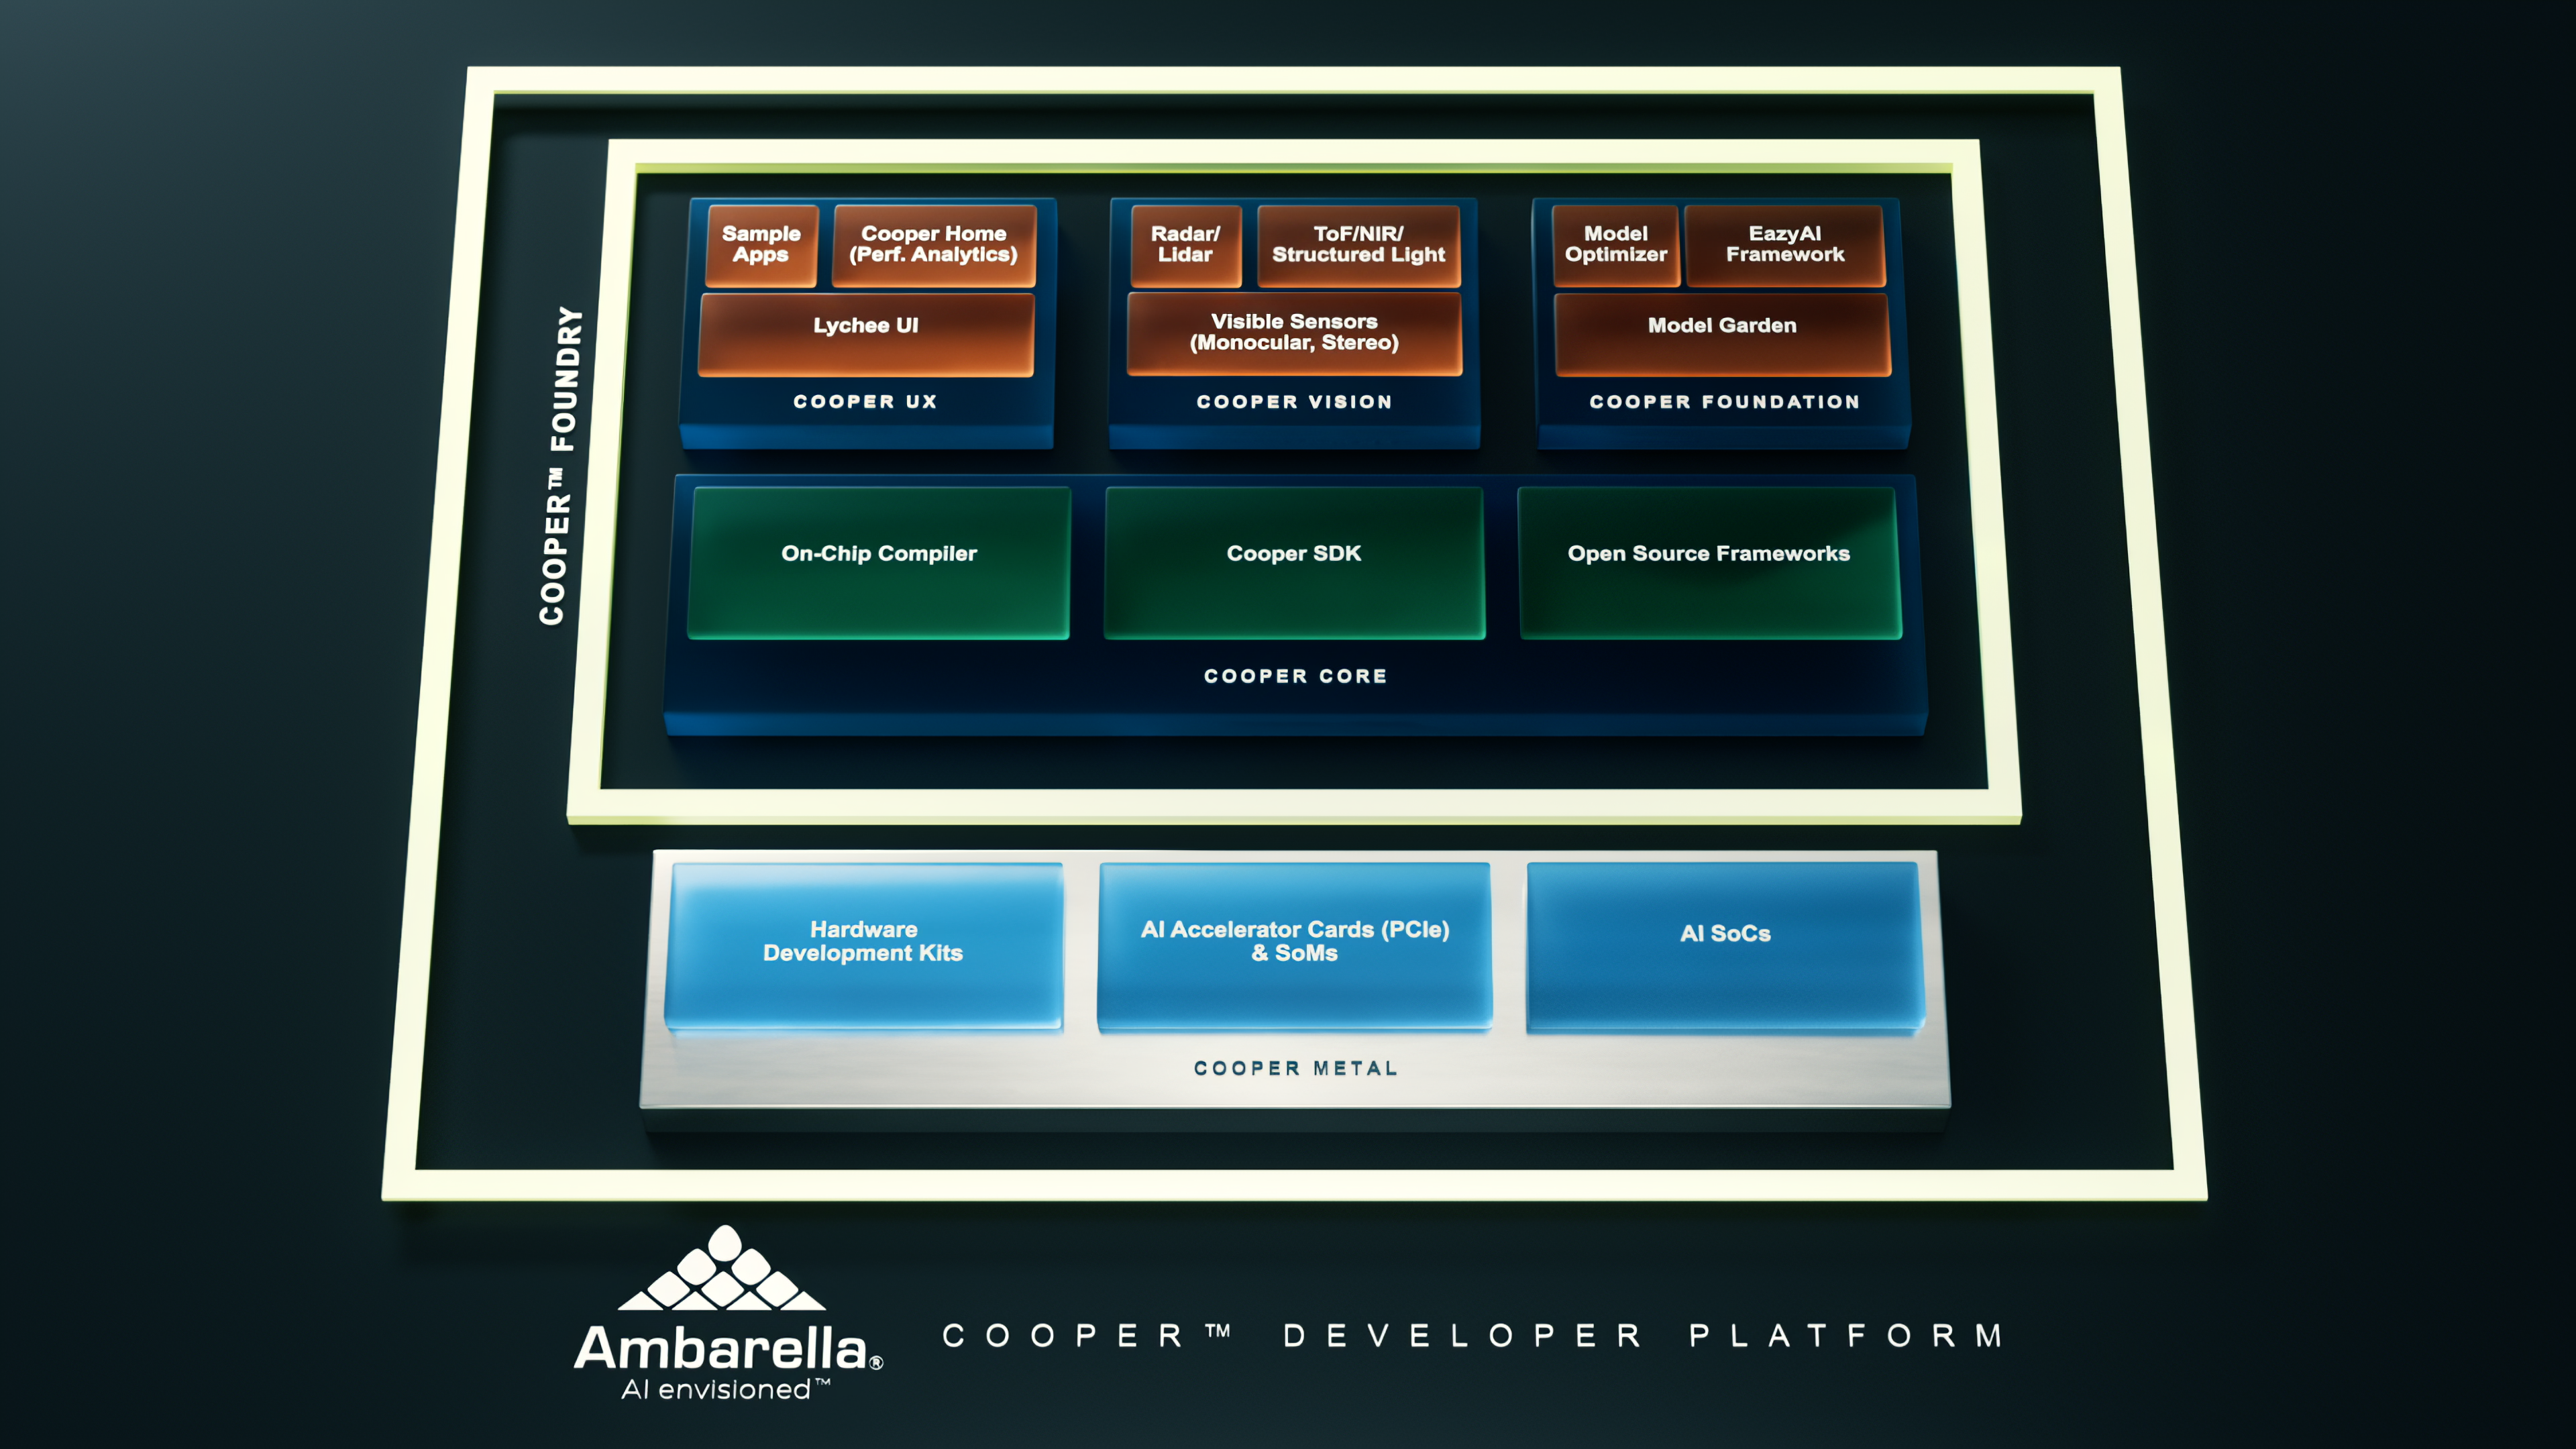 Ambarella's Cooper™ Developer Platform Provides Power Efficient Solution for Industrial, AIoT, Intelligent Video Analytics and Edge AI Computing Applications